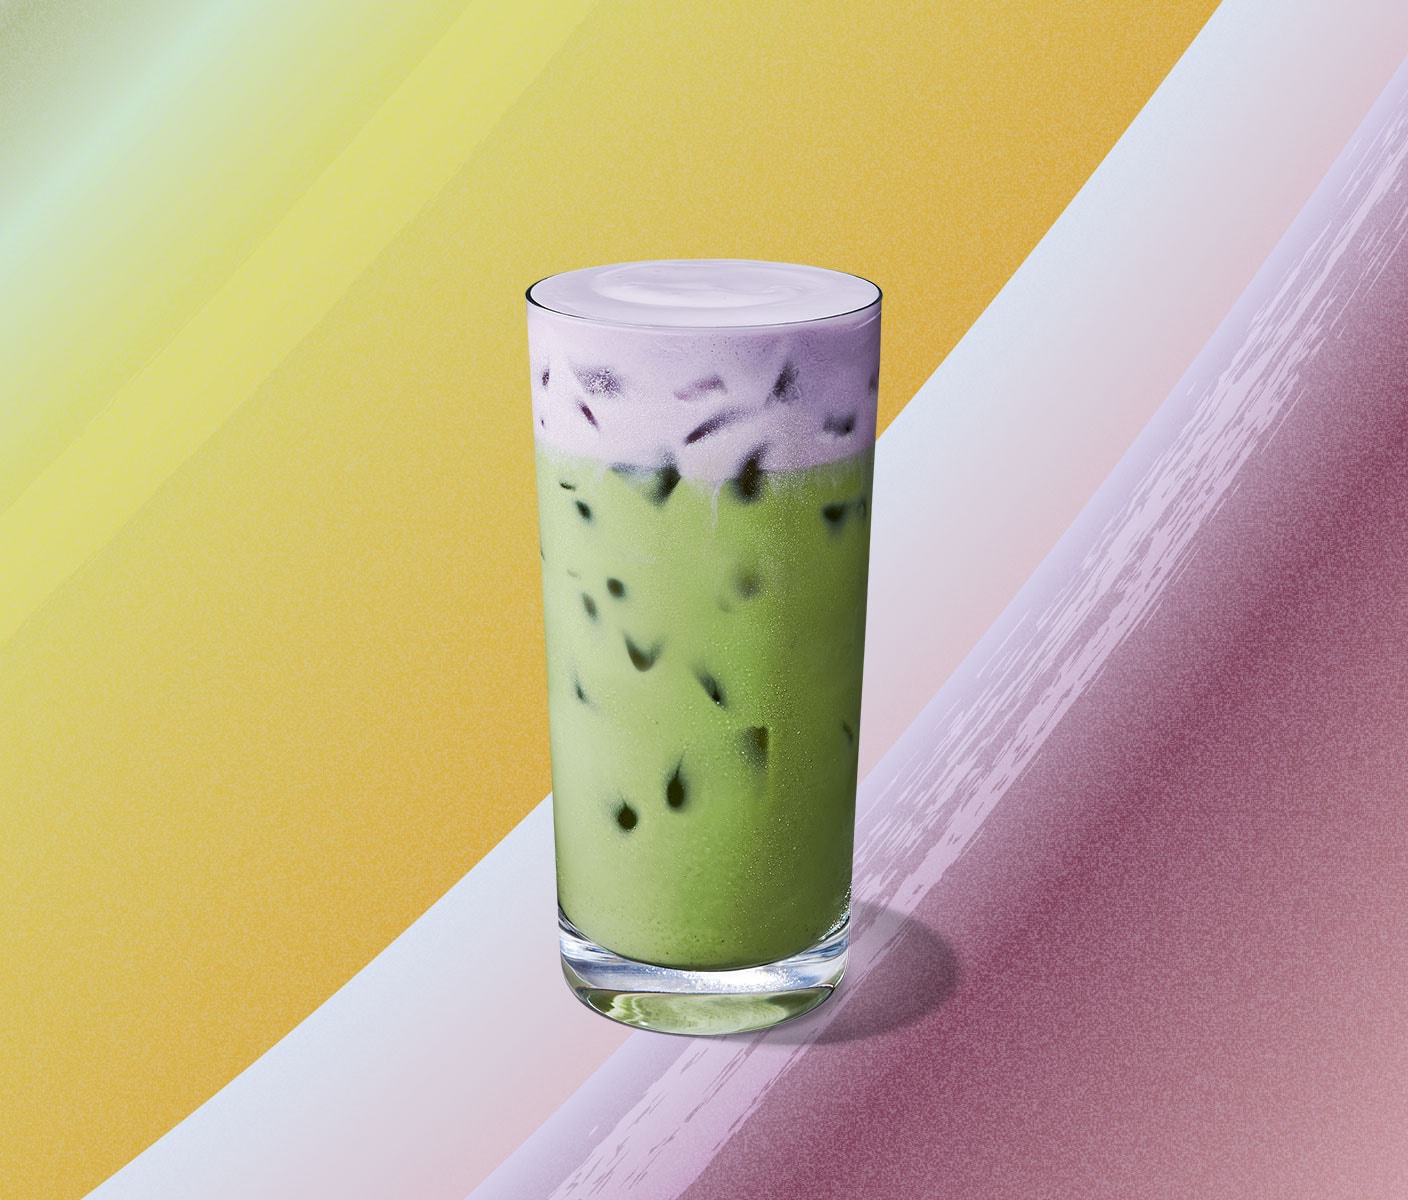 Iced green tea with a lavender-hued foamy topping.